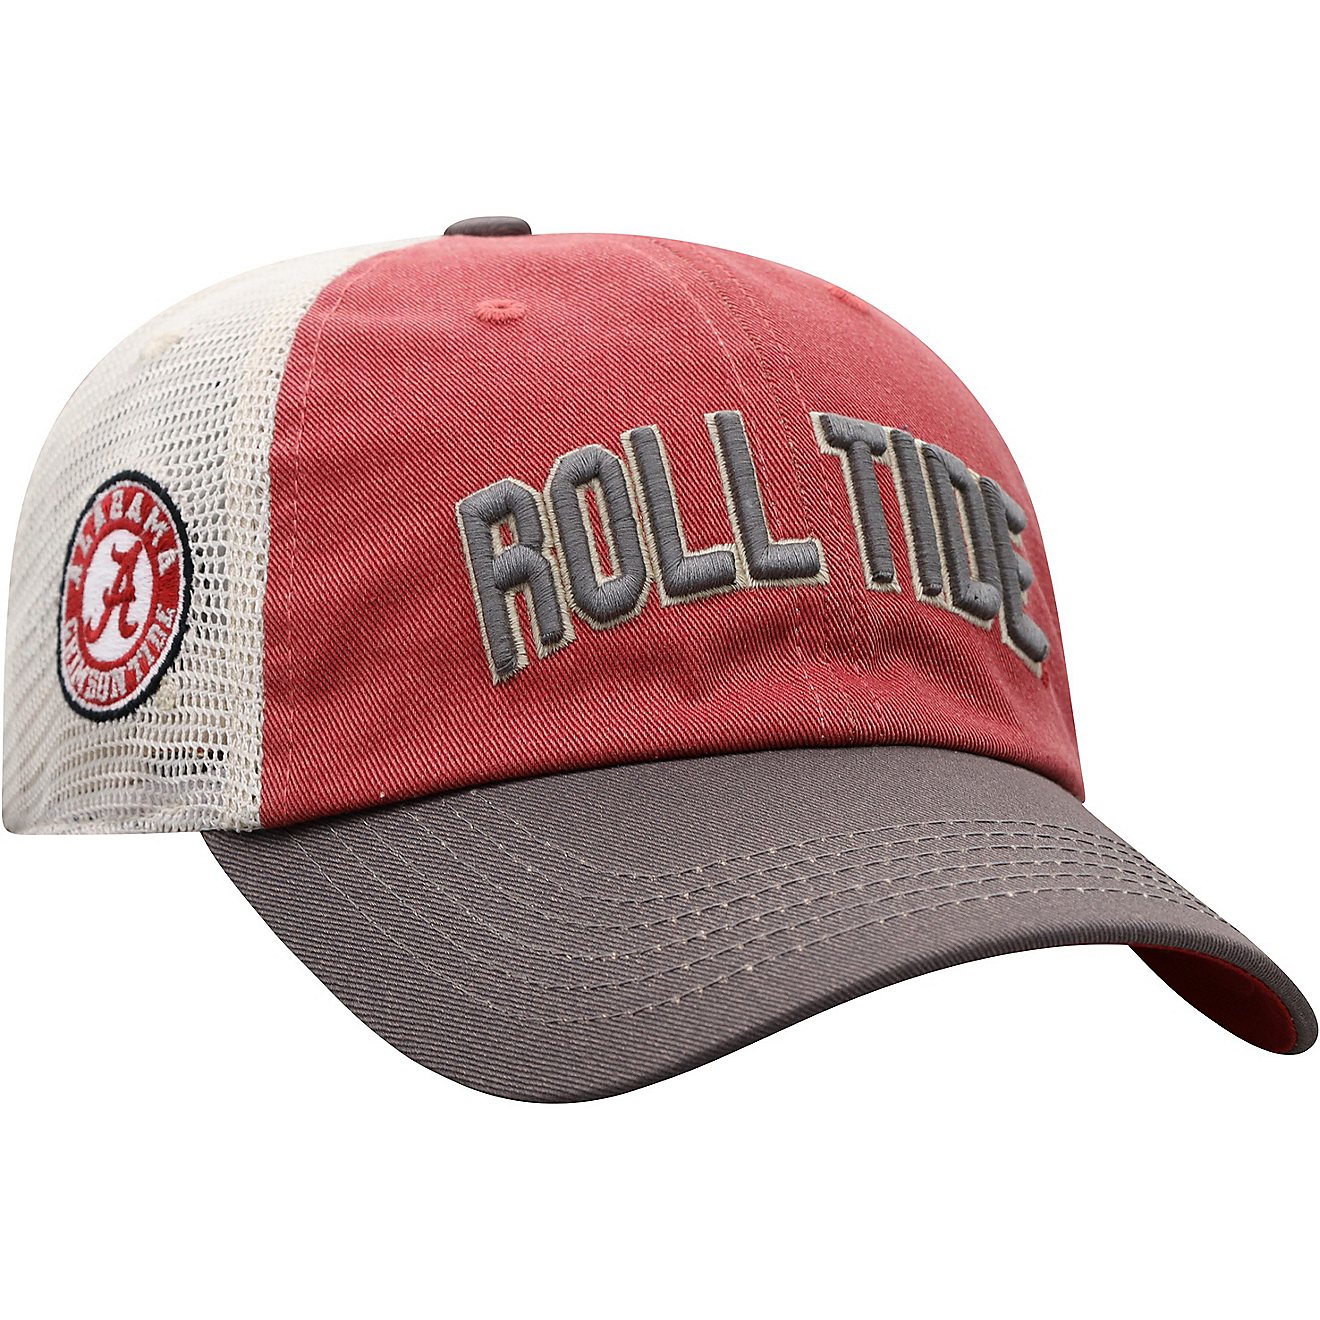 Top of the World Men's University of Alabama Andy 3-Tone Cap                                                                     - view number 1